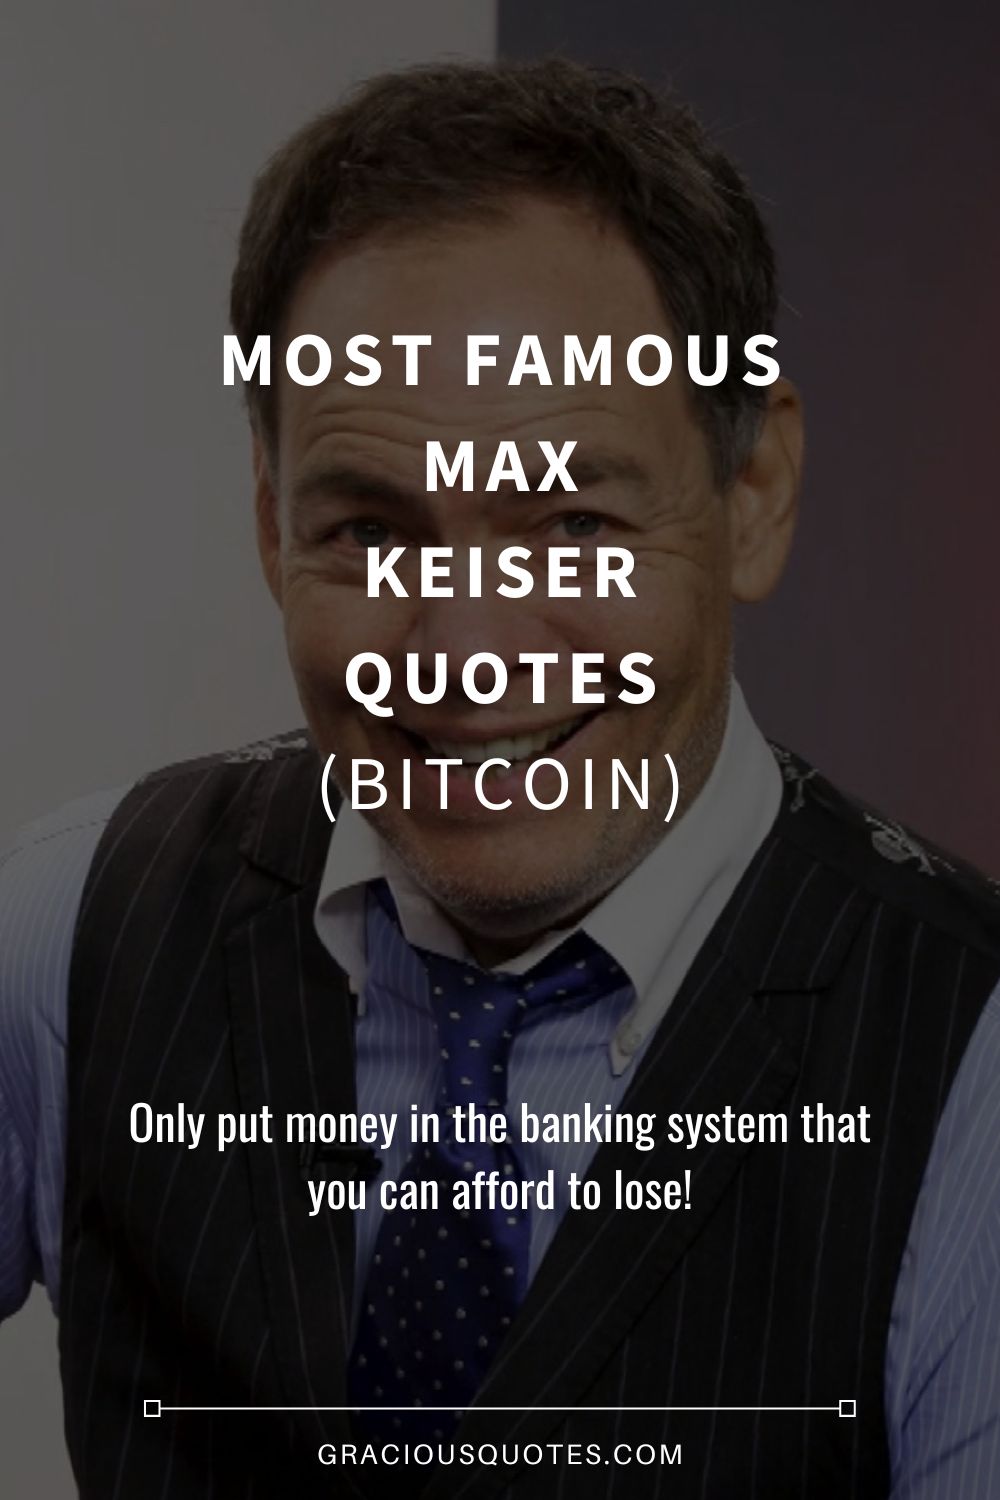 Most Famous Max Keiser Quotes (BITCOIN) - Gracious Quotes